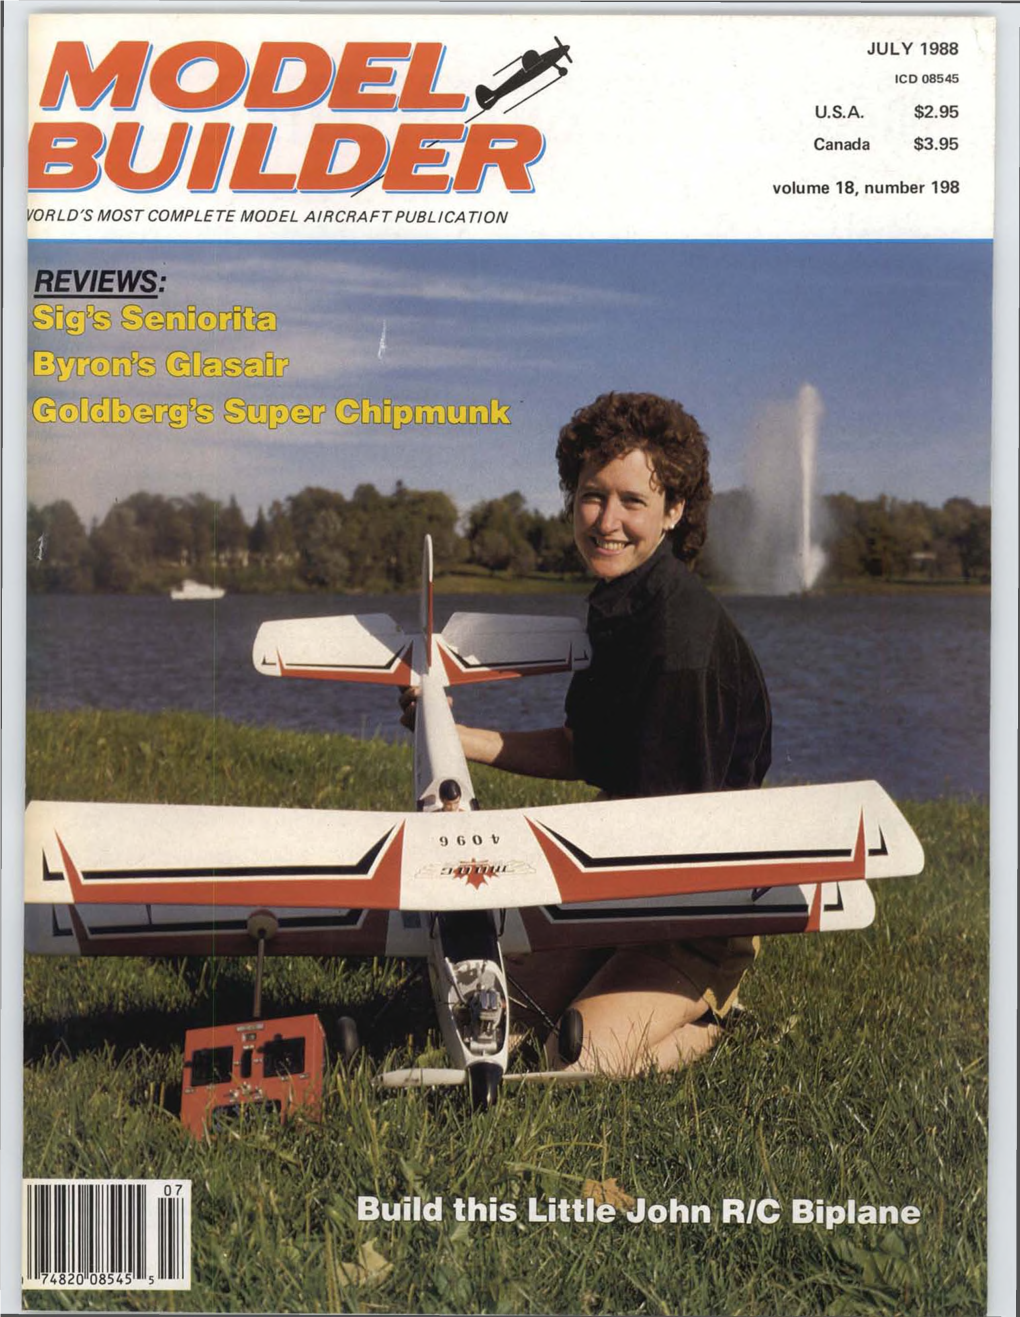 MODEL BUILDER JULY 1988 13 Fuselage Ready for Shaping and Sanding